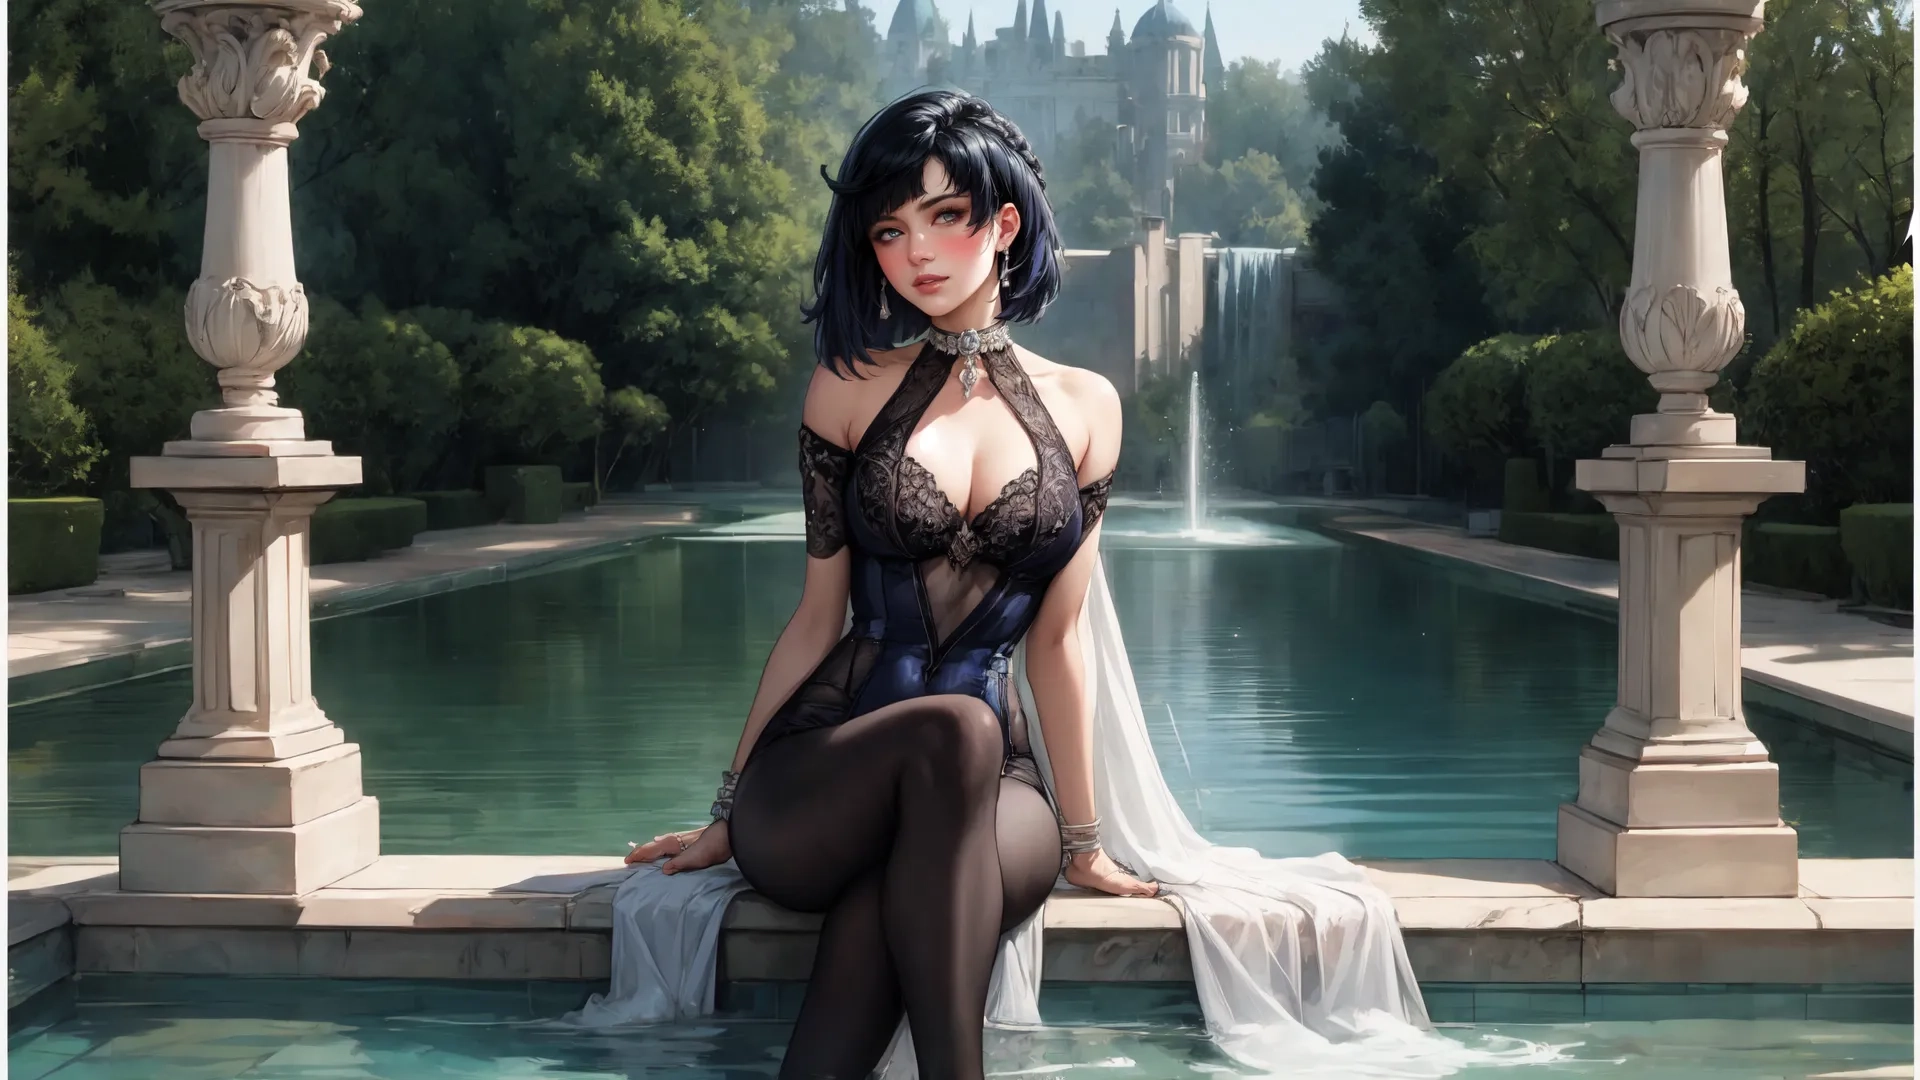 the sexy woman is posing in front of a fountain and lake with a castle behind her, and trees surrounding by, and behind her
